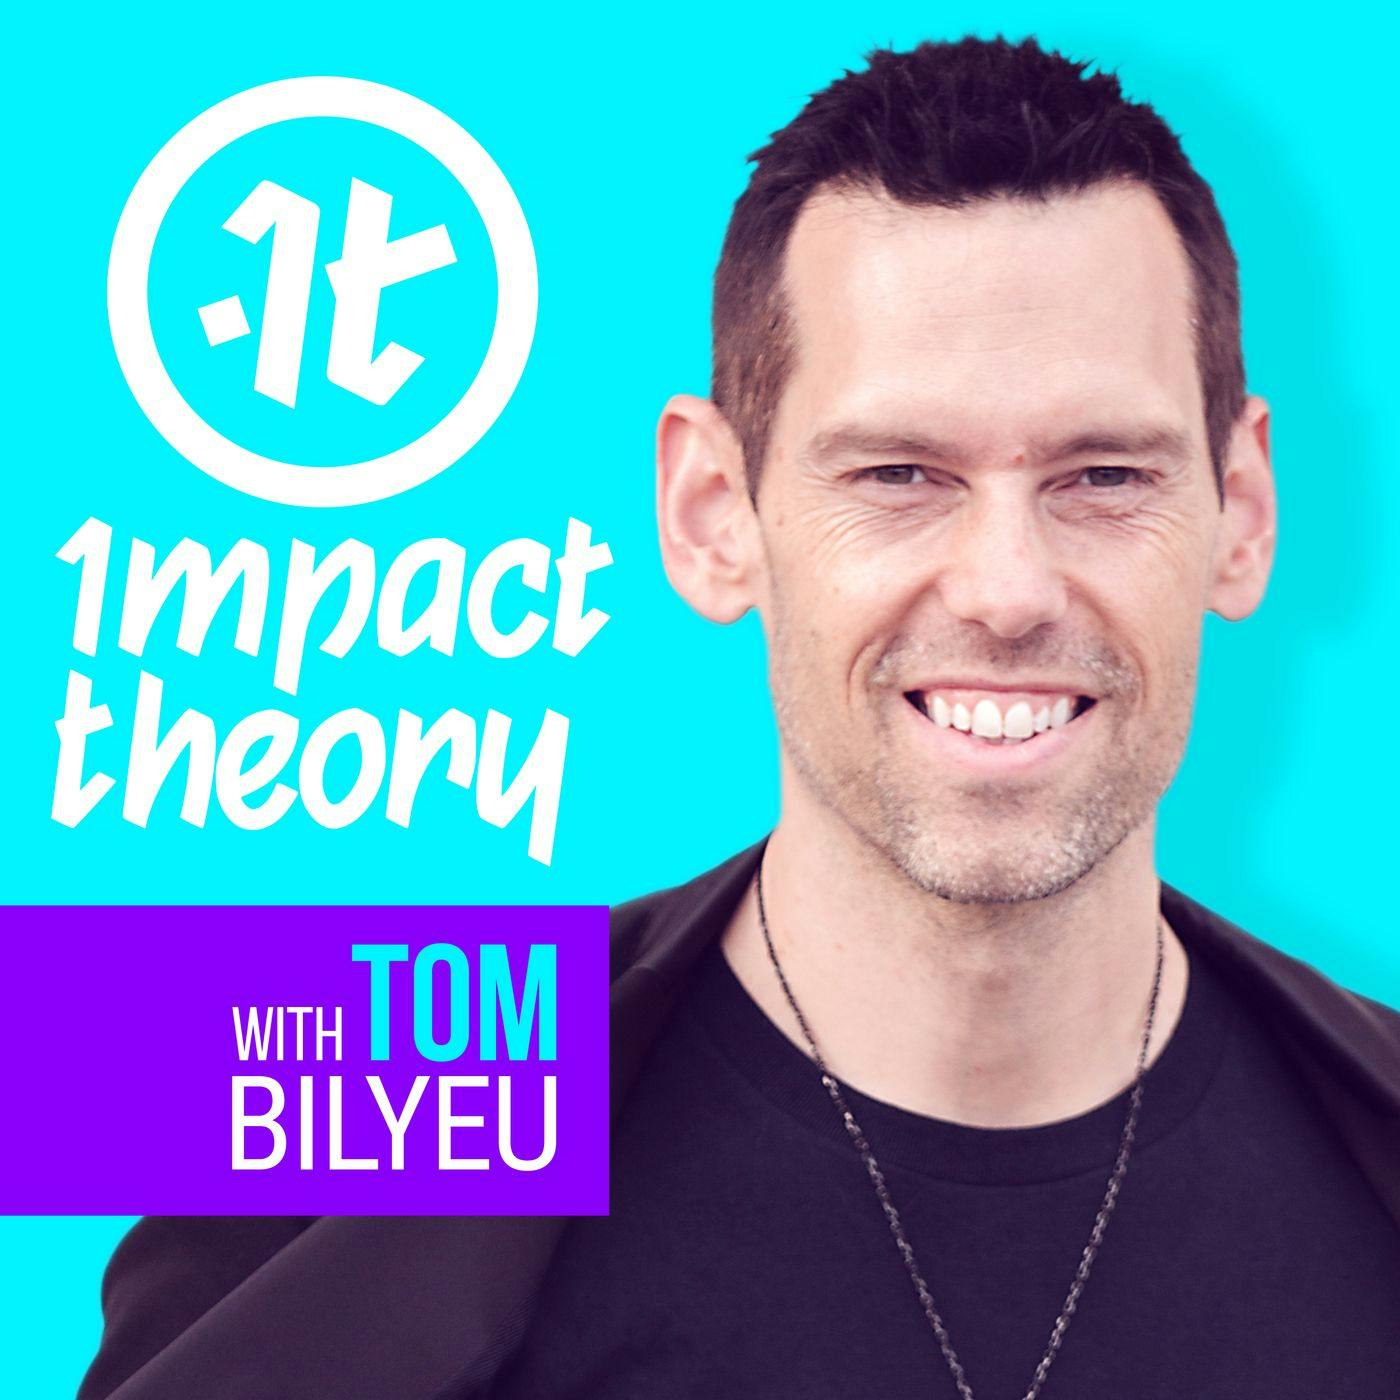 Tom Bilyeu - That pretty much sums up my life philosophy and the very  nature of fulfillment. I think all of us long to do the hard things and to  become more